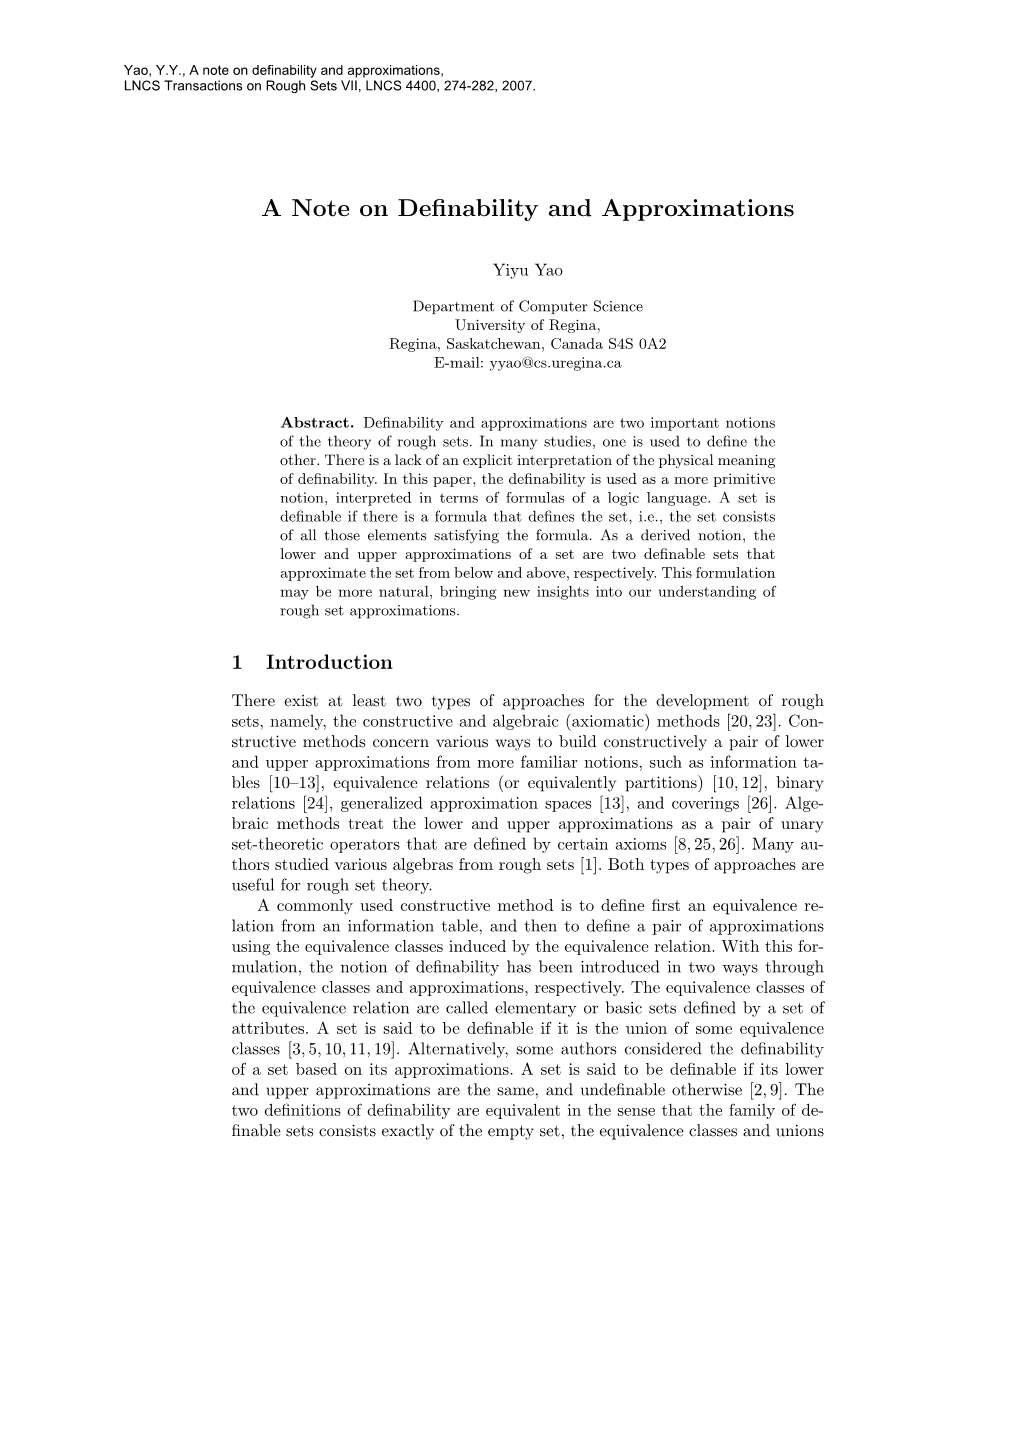 A Note on Definability and Approximations, LNCS Transactions on Rough Sets VII, LNCS 4400, 274-282, 2007